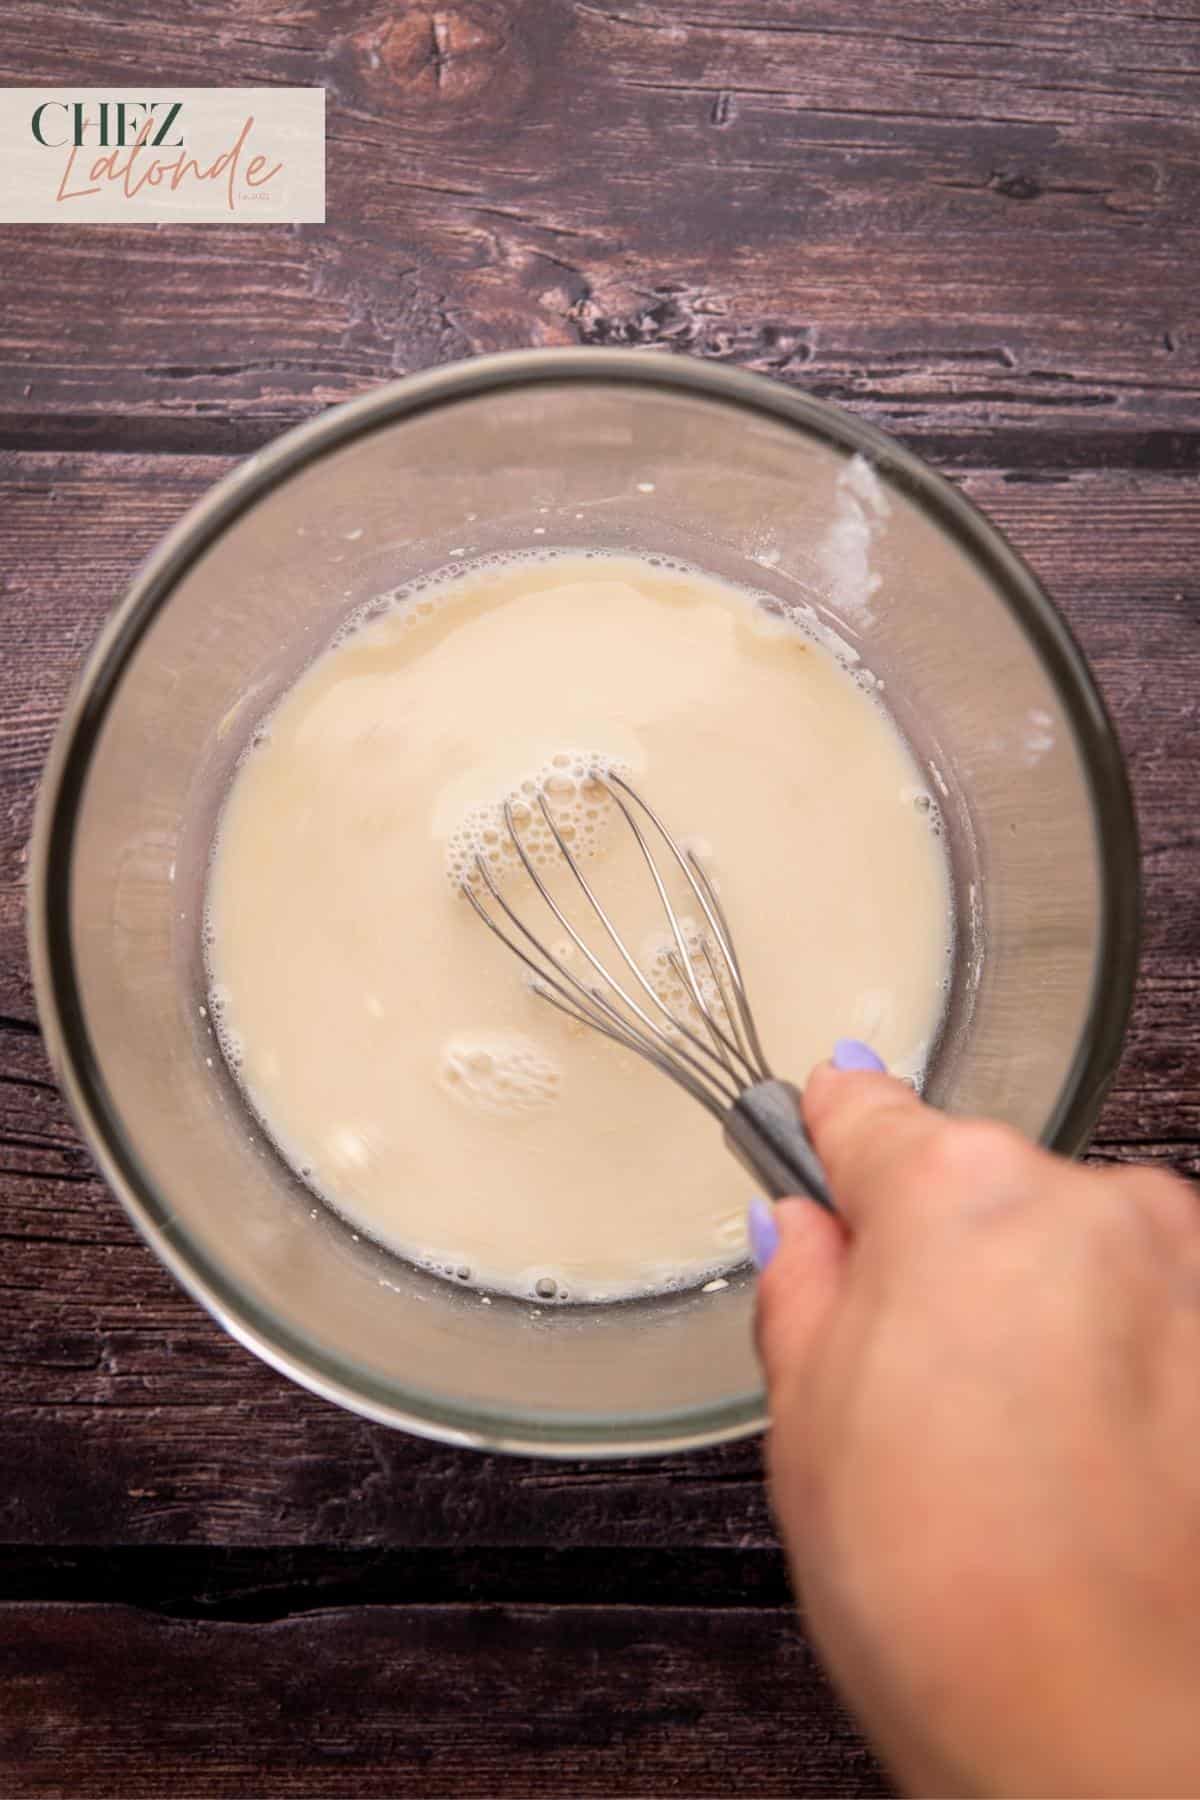 Use a spatula or whisk to mix thoroughly.